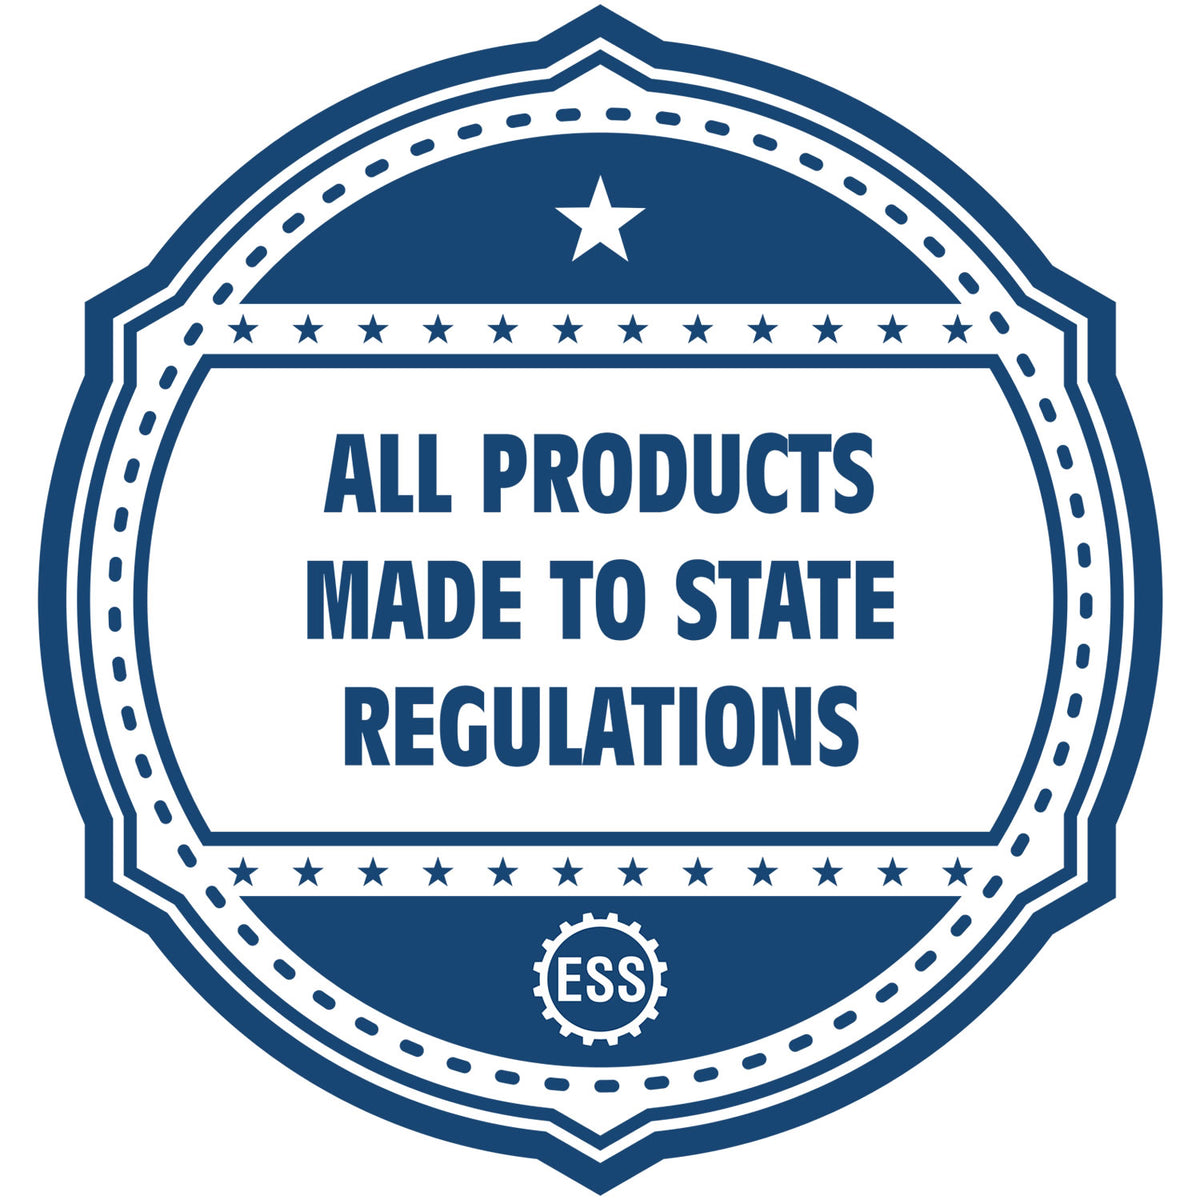 An icon or badge element for the Self-Inking Connecticut PE Stamp showing that this product is made in compliance with state regulations.